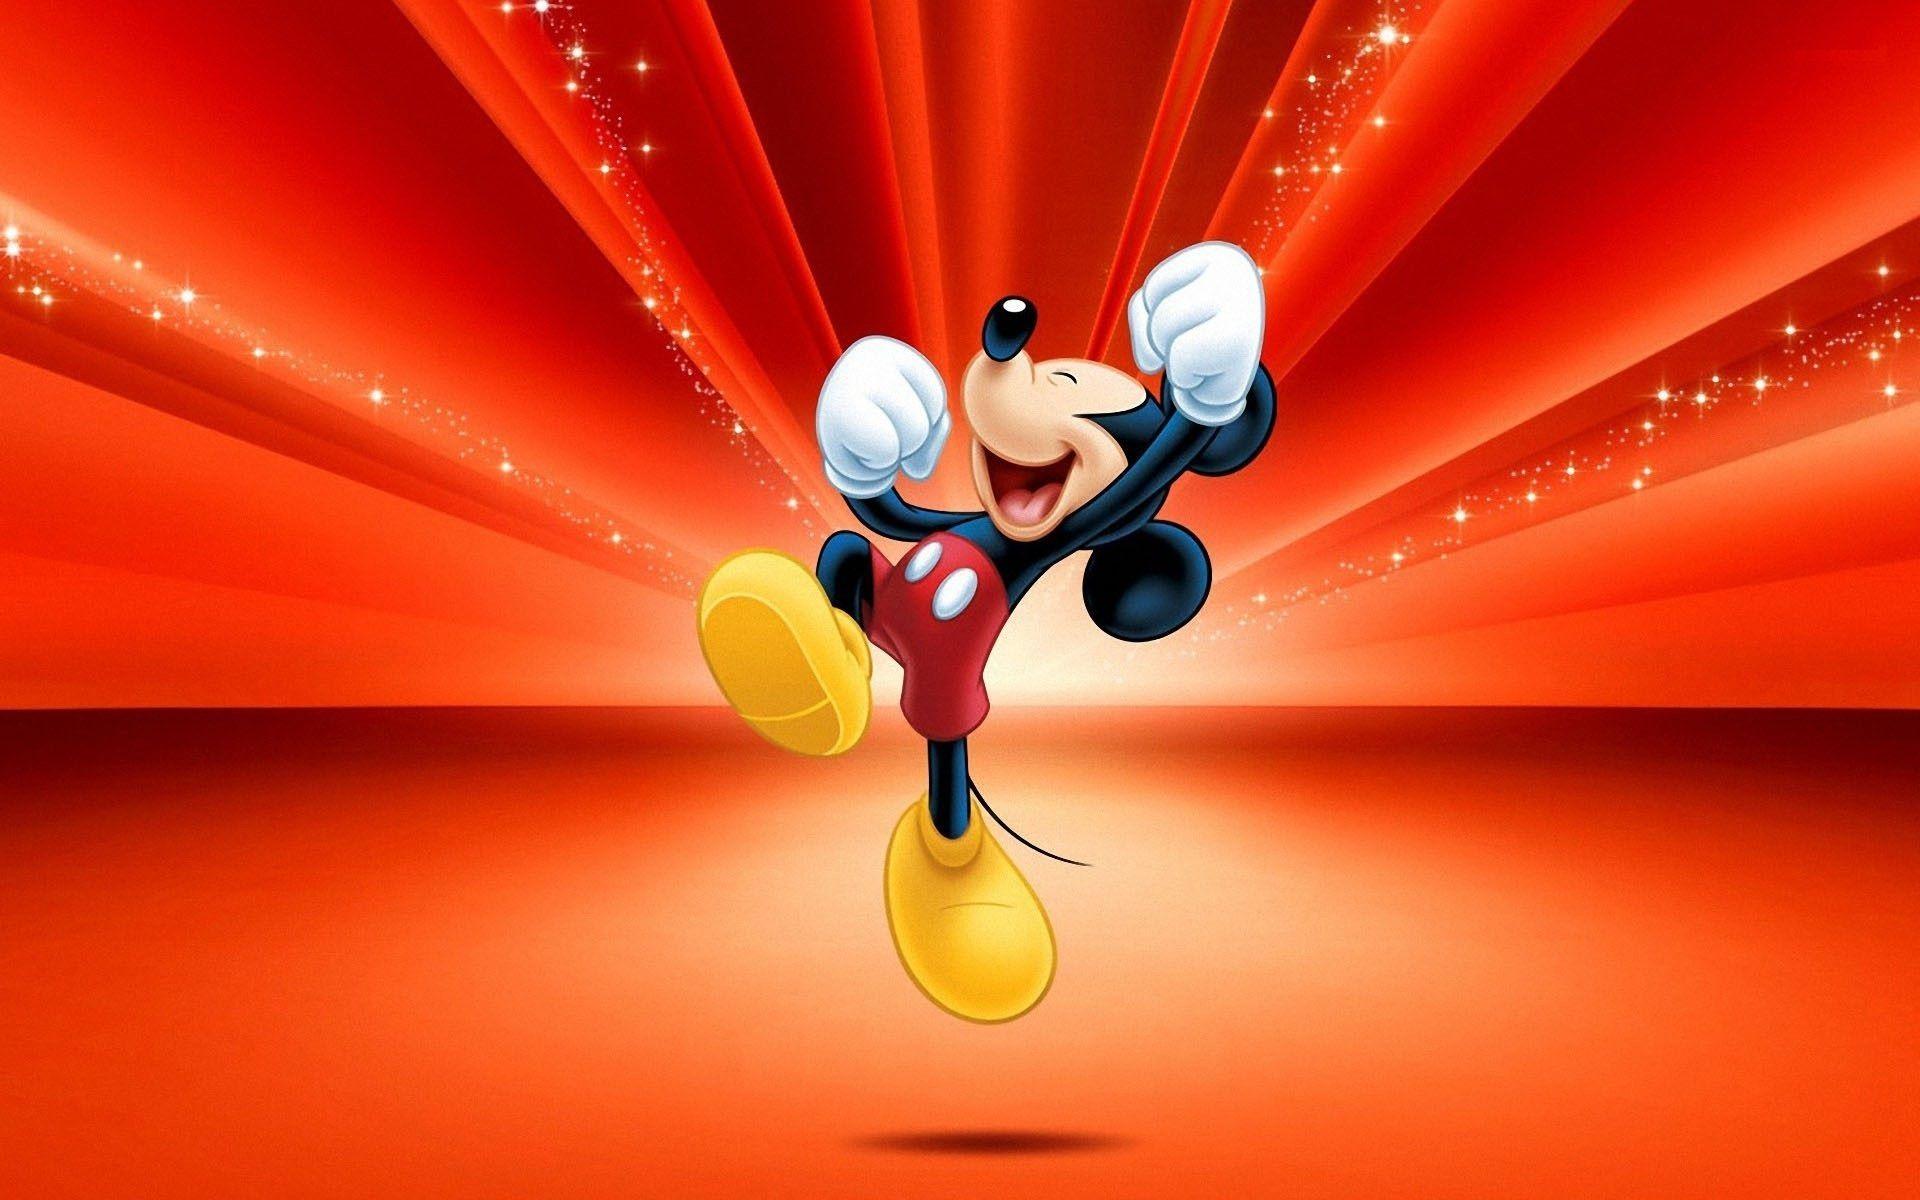 750x1334 Mickey Mouse iPhone 7 and iPhone 7 Plus HD Wallpaper - HD iPhone 7  ... | Sfondi per iphone, Sfondi gratis, Sfondi carini